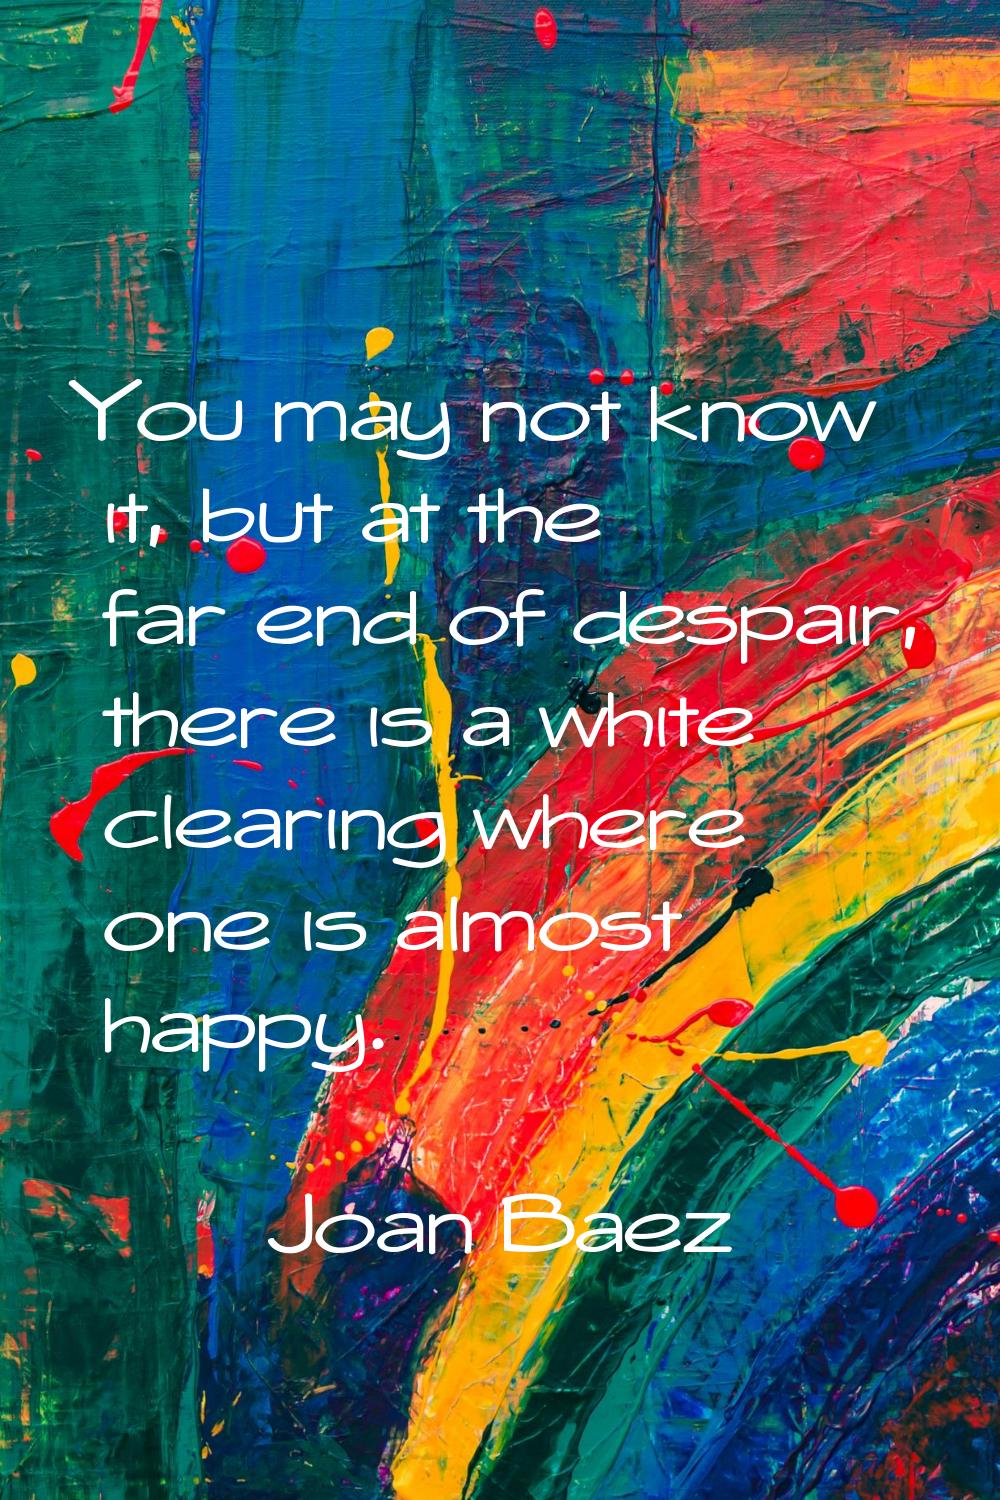 You may not know it, but at the far end of despair, there is a white clearing where one is almost h